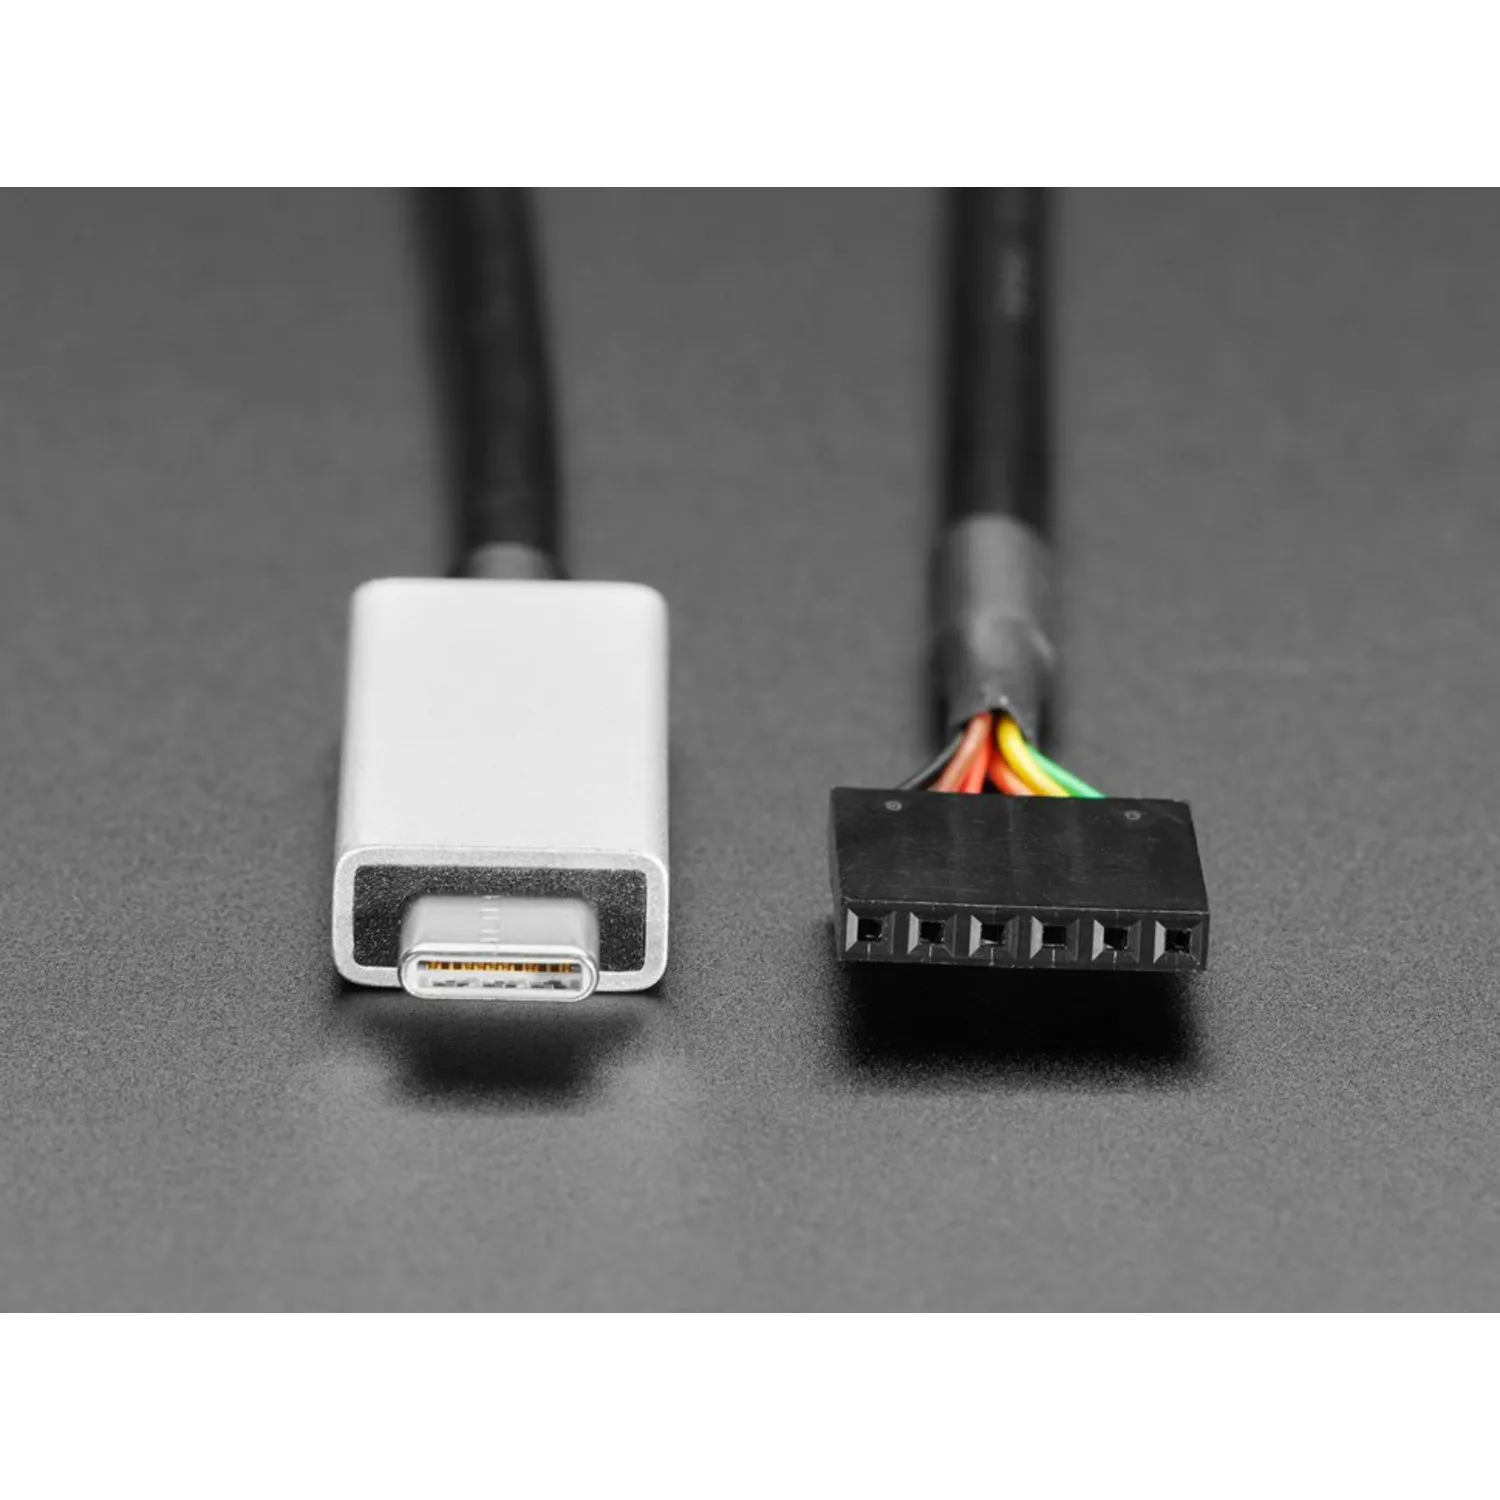 Photo of FTDI Serial TTL-232 USB Type C Cable - 5V Power and Logic